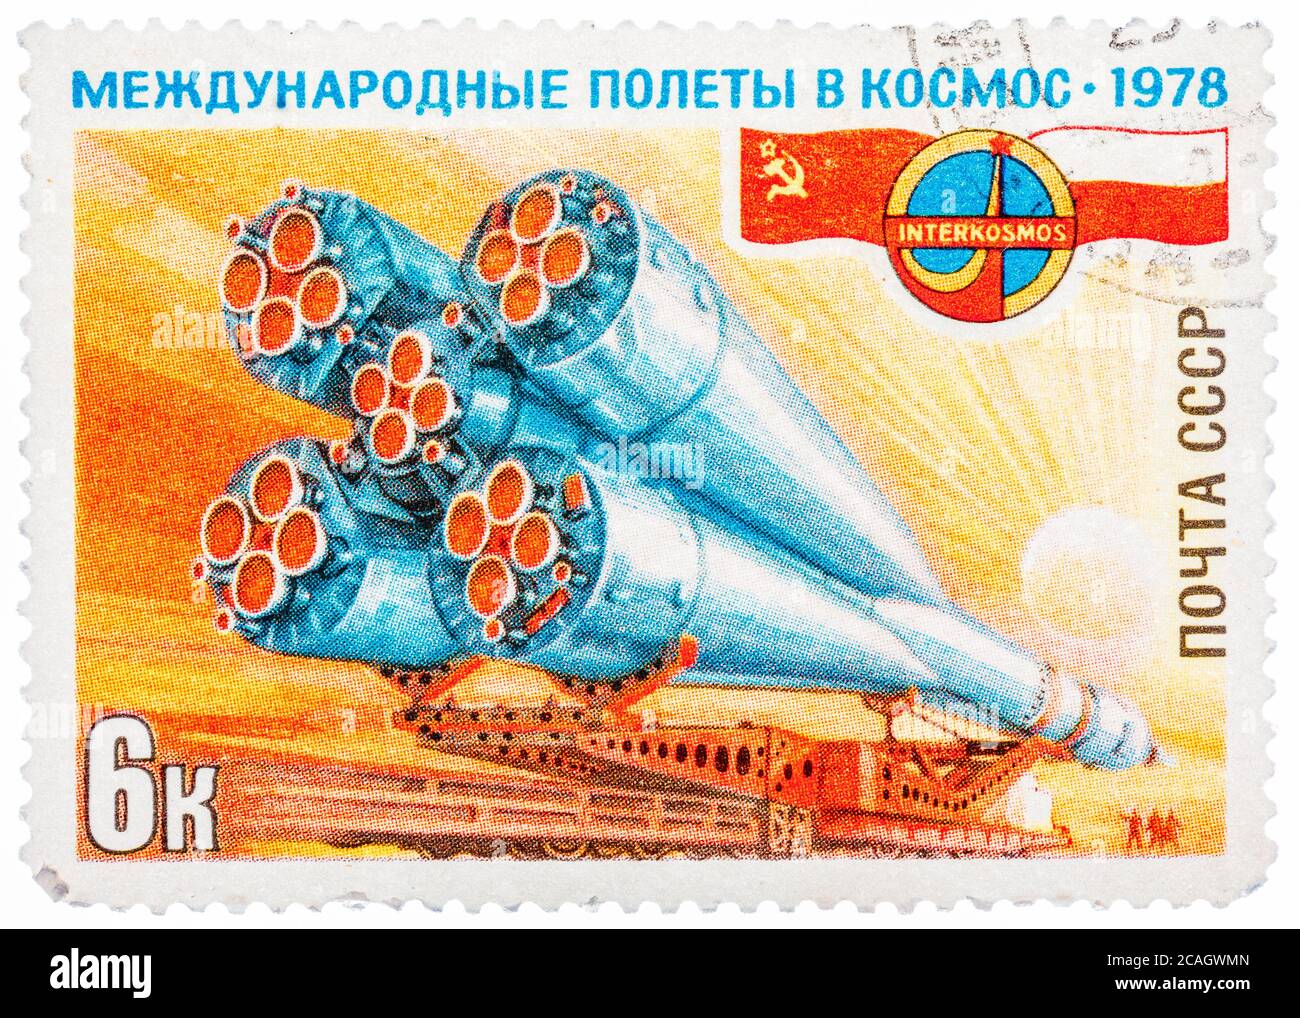 Stamp printed in USSR, International flights into space, Intercosmos, delivery of spacecraft to rocket launch pad for space flight Stock Photo